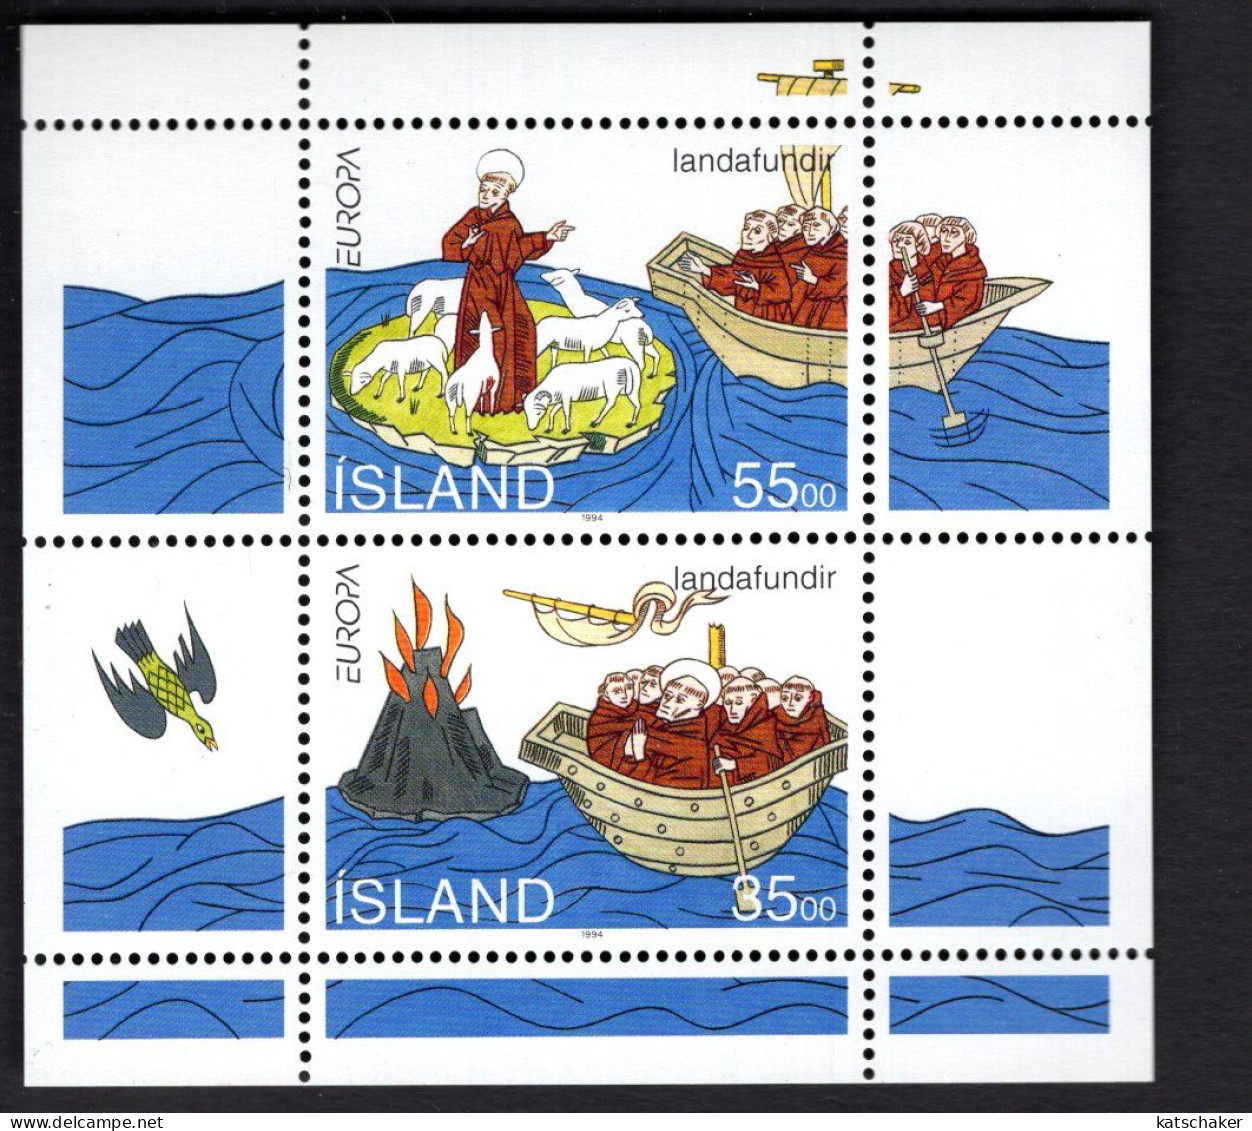 2021744699 1994 SCOTT 781A (XX)  POSTFRIS MINT NEVER HINGED - EUROPA ISSUE -  VOYAGES OF ST. BRENDAN - Unused Stamps